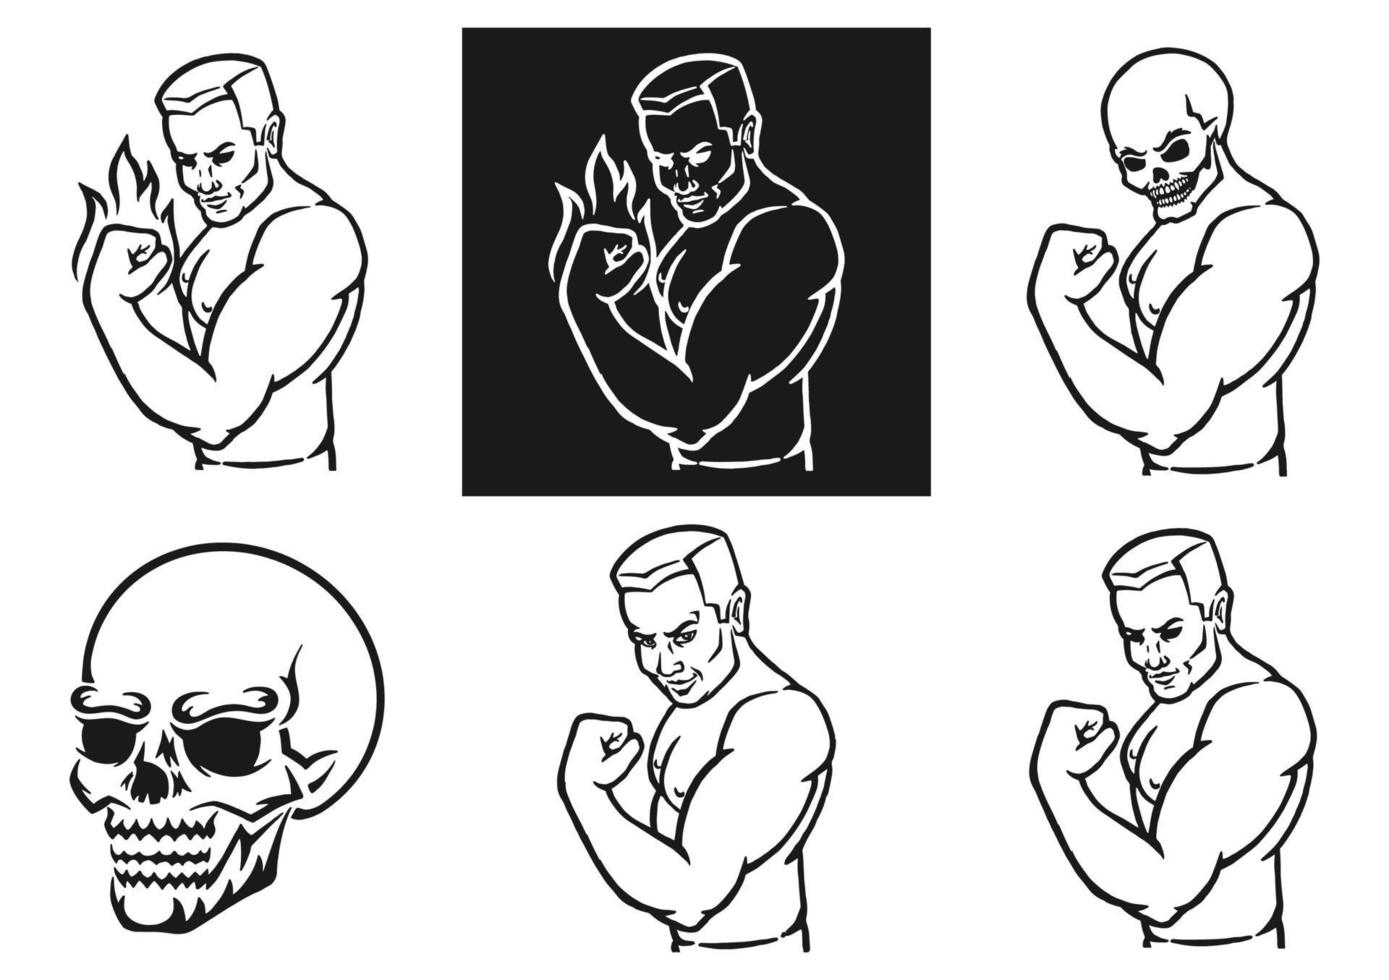 Male bodybuilder flexing his biceps. Outline silhouette. Design element. Vector illustration isolated on white background. Template for books, stickers, posters, cards, clothes.